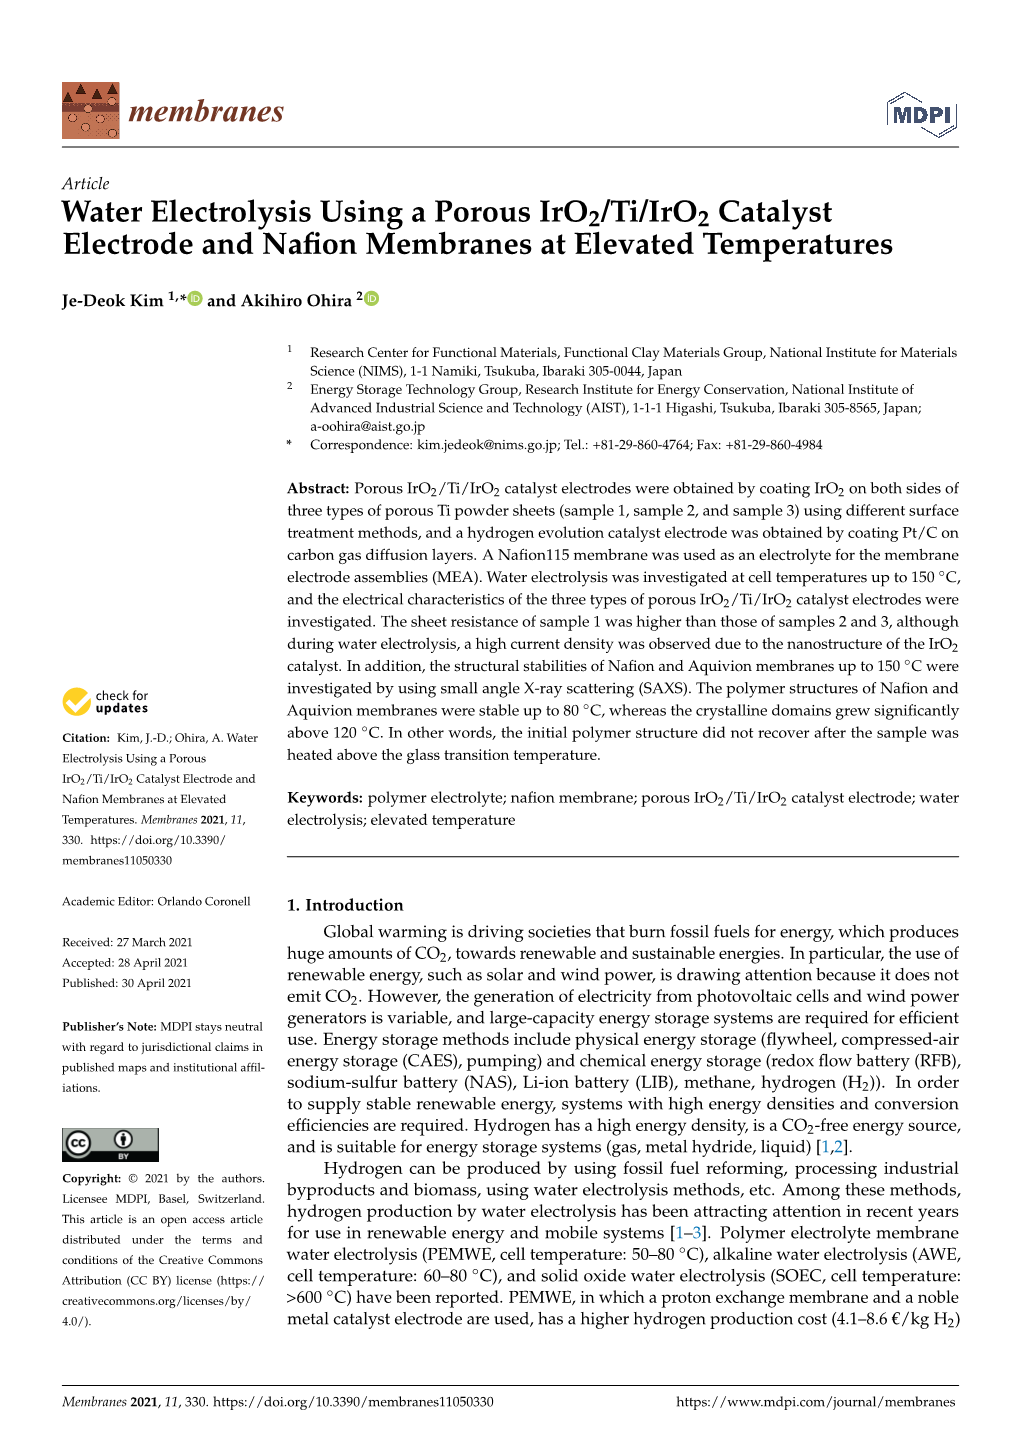 Water Electrolysis Using a Porous Iro2/Ti/Iro2 Catalyst Electrode and Naﬁon Membranes at Elevated Temperatures